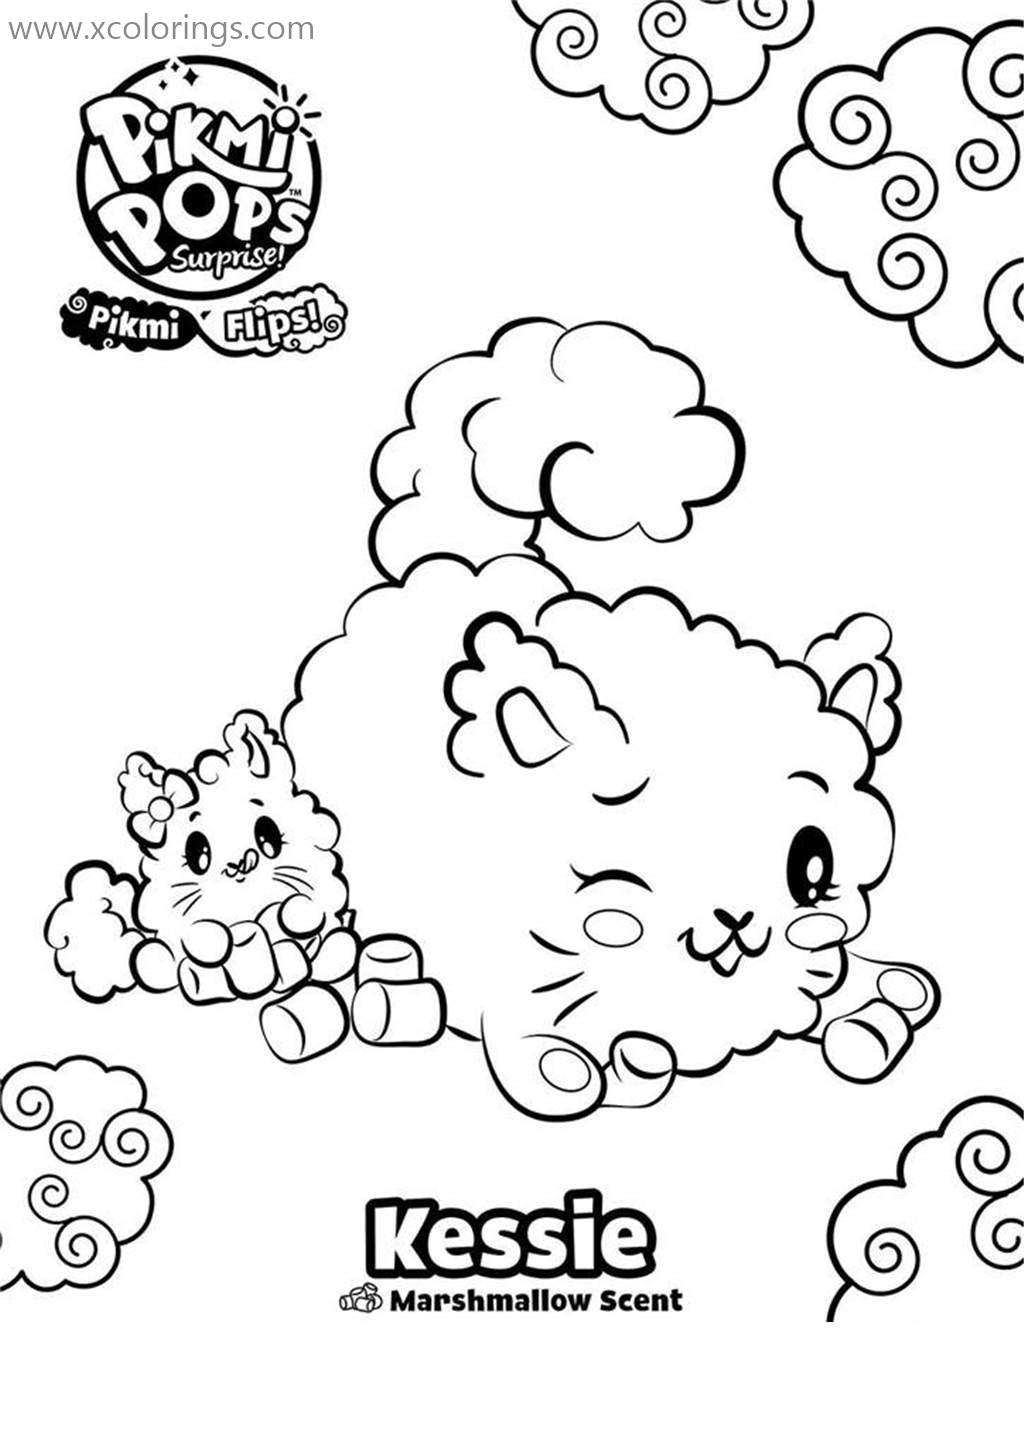 Free Kessie from Pikmi Pops Coloring Pages printable